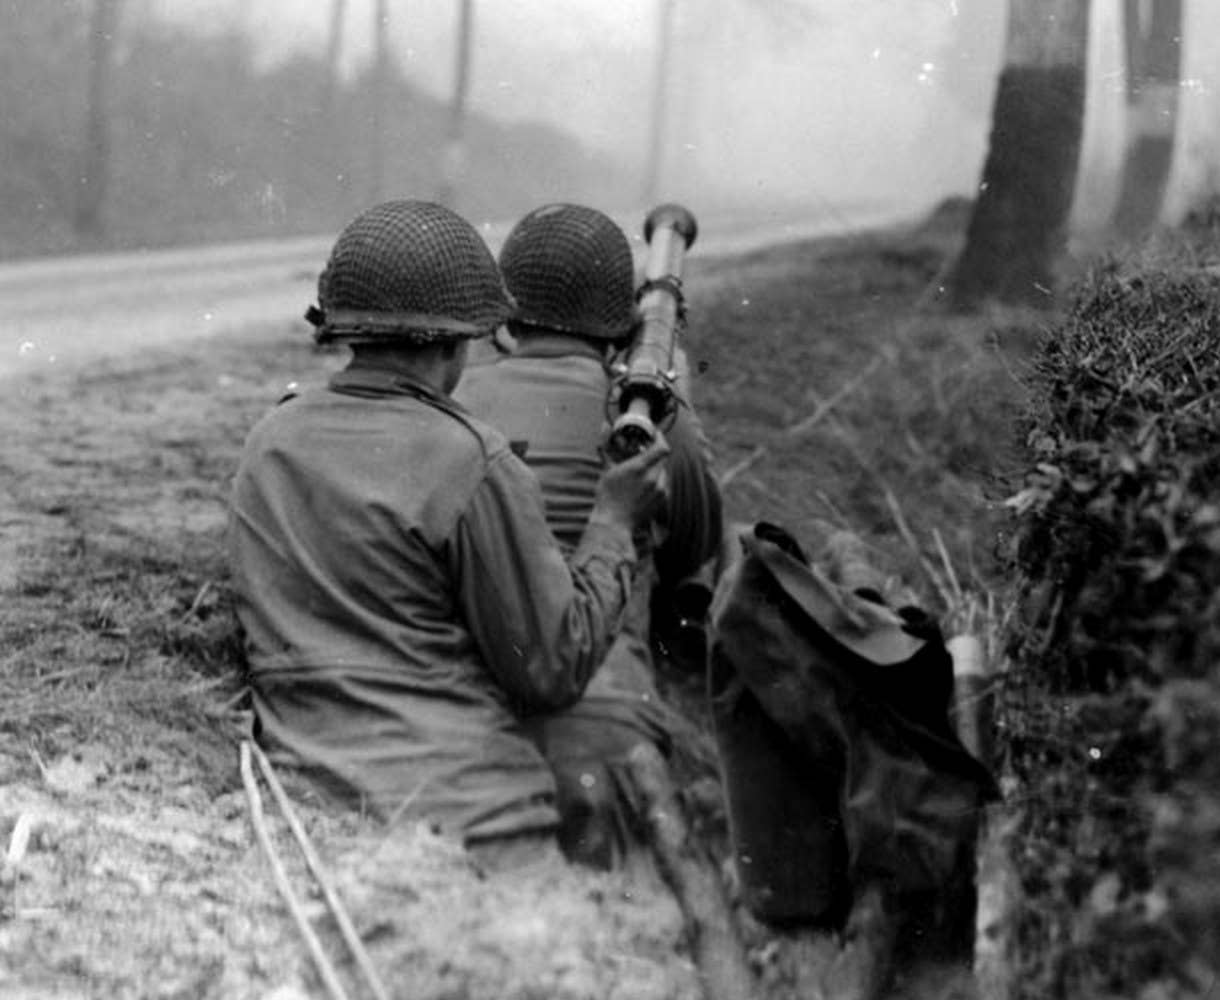 Two soldiers in the 82nd Airborne load and aim a bazooka at a German vehicle on road in France, 1944. (U.S. Army photo)